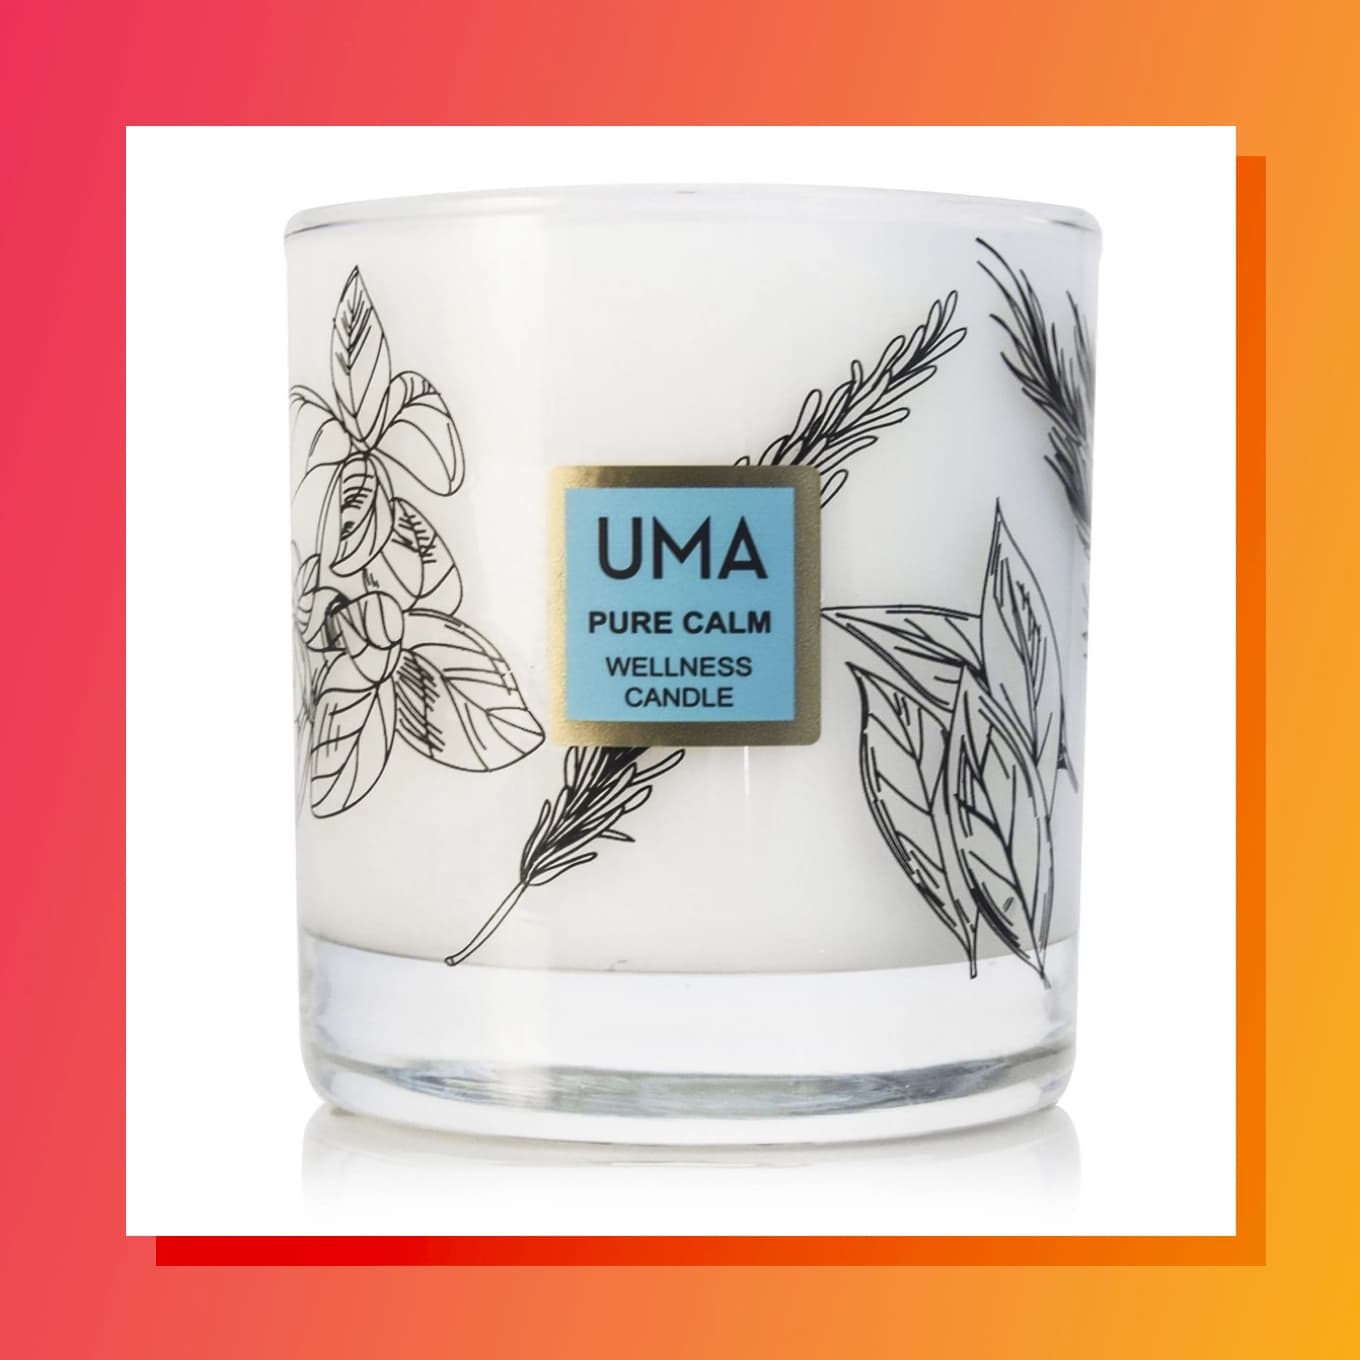 Label Un Candle that says Uma Pure Calm Wellness Candle